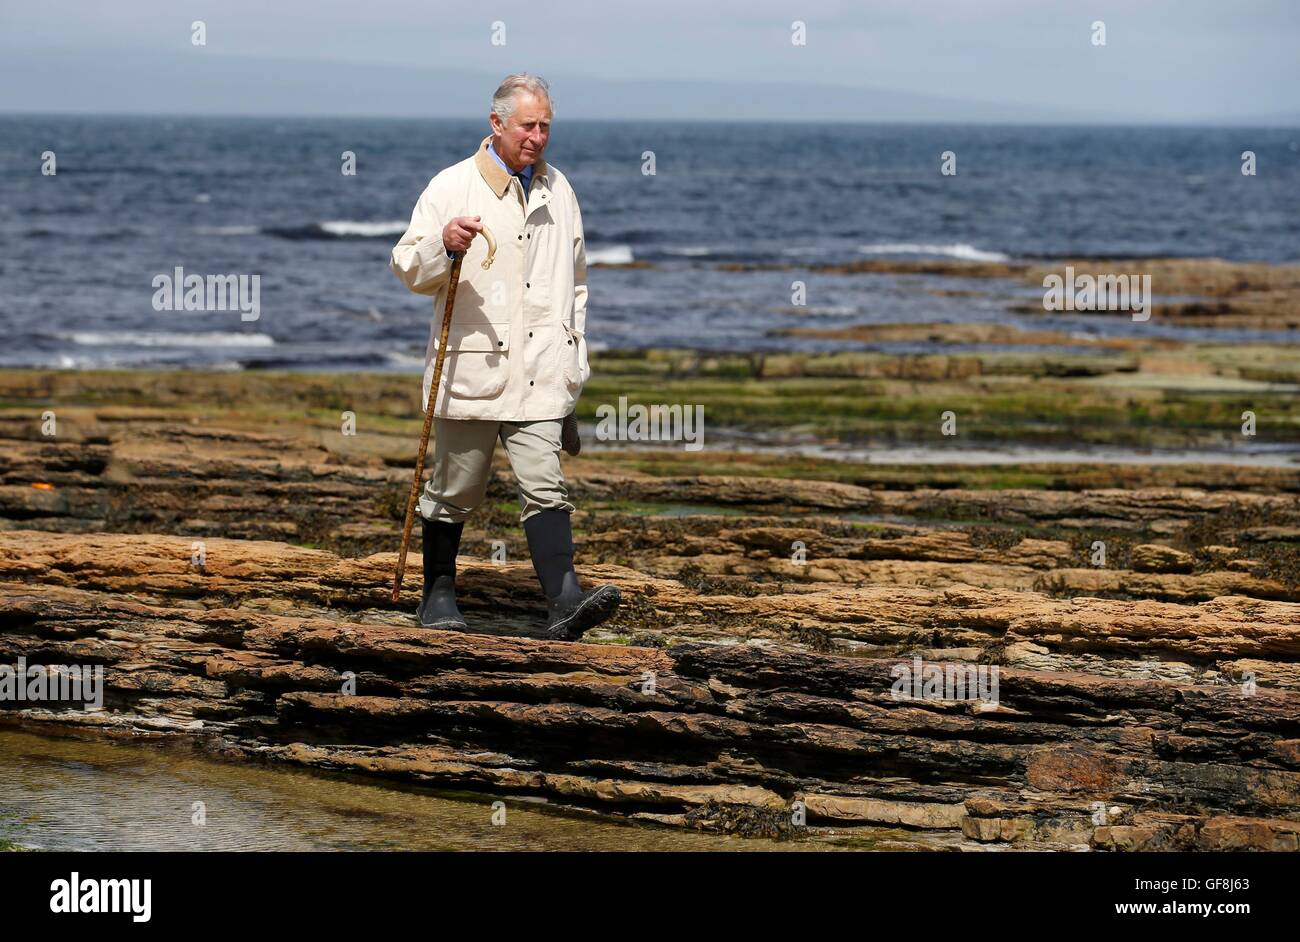 The Prince of Wales, known as the Duke of Rothesay while in Scotland, walks on the beach near Castle Mey, to watch staff from New Wave Foods, a new business based in Wick, harvest edible seaweed from the beach. Stock Photo